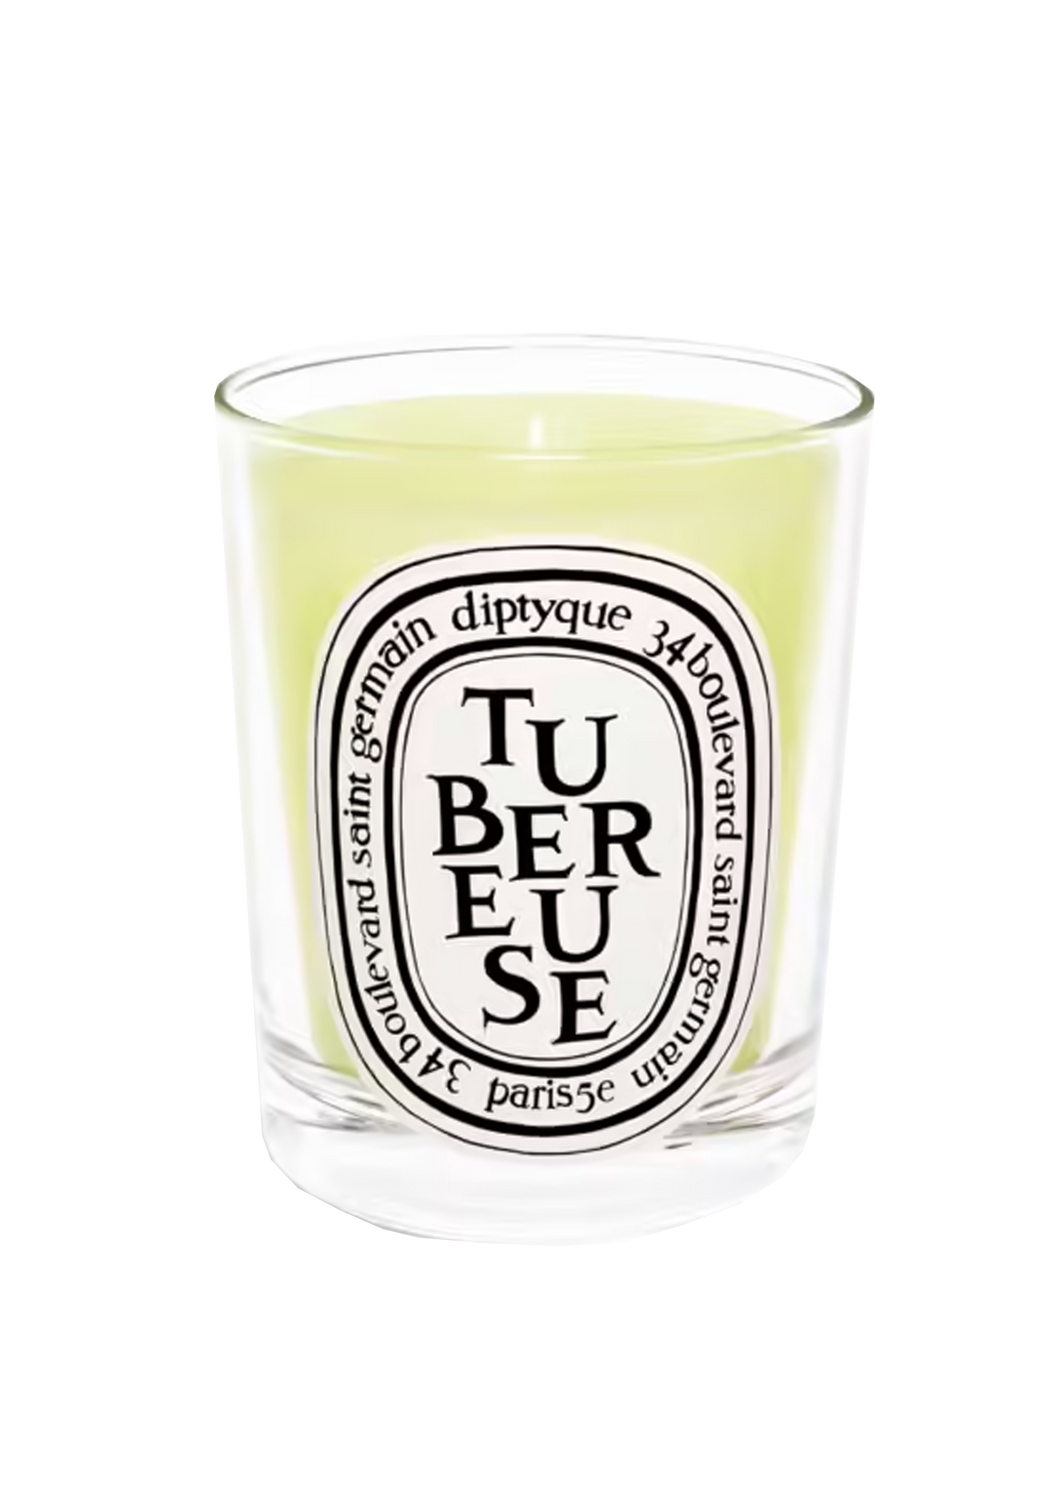 Diptyque 190g Tubereuse Candle